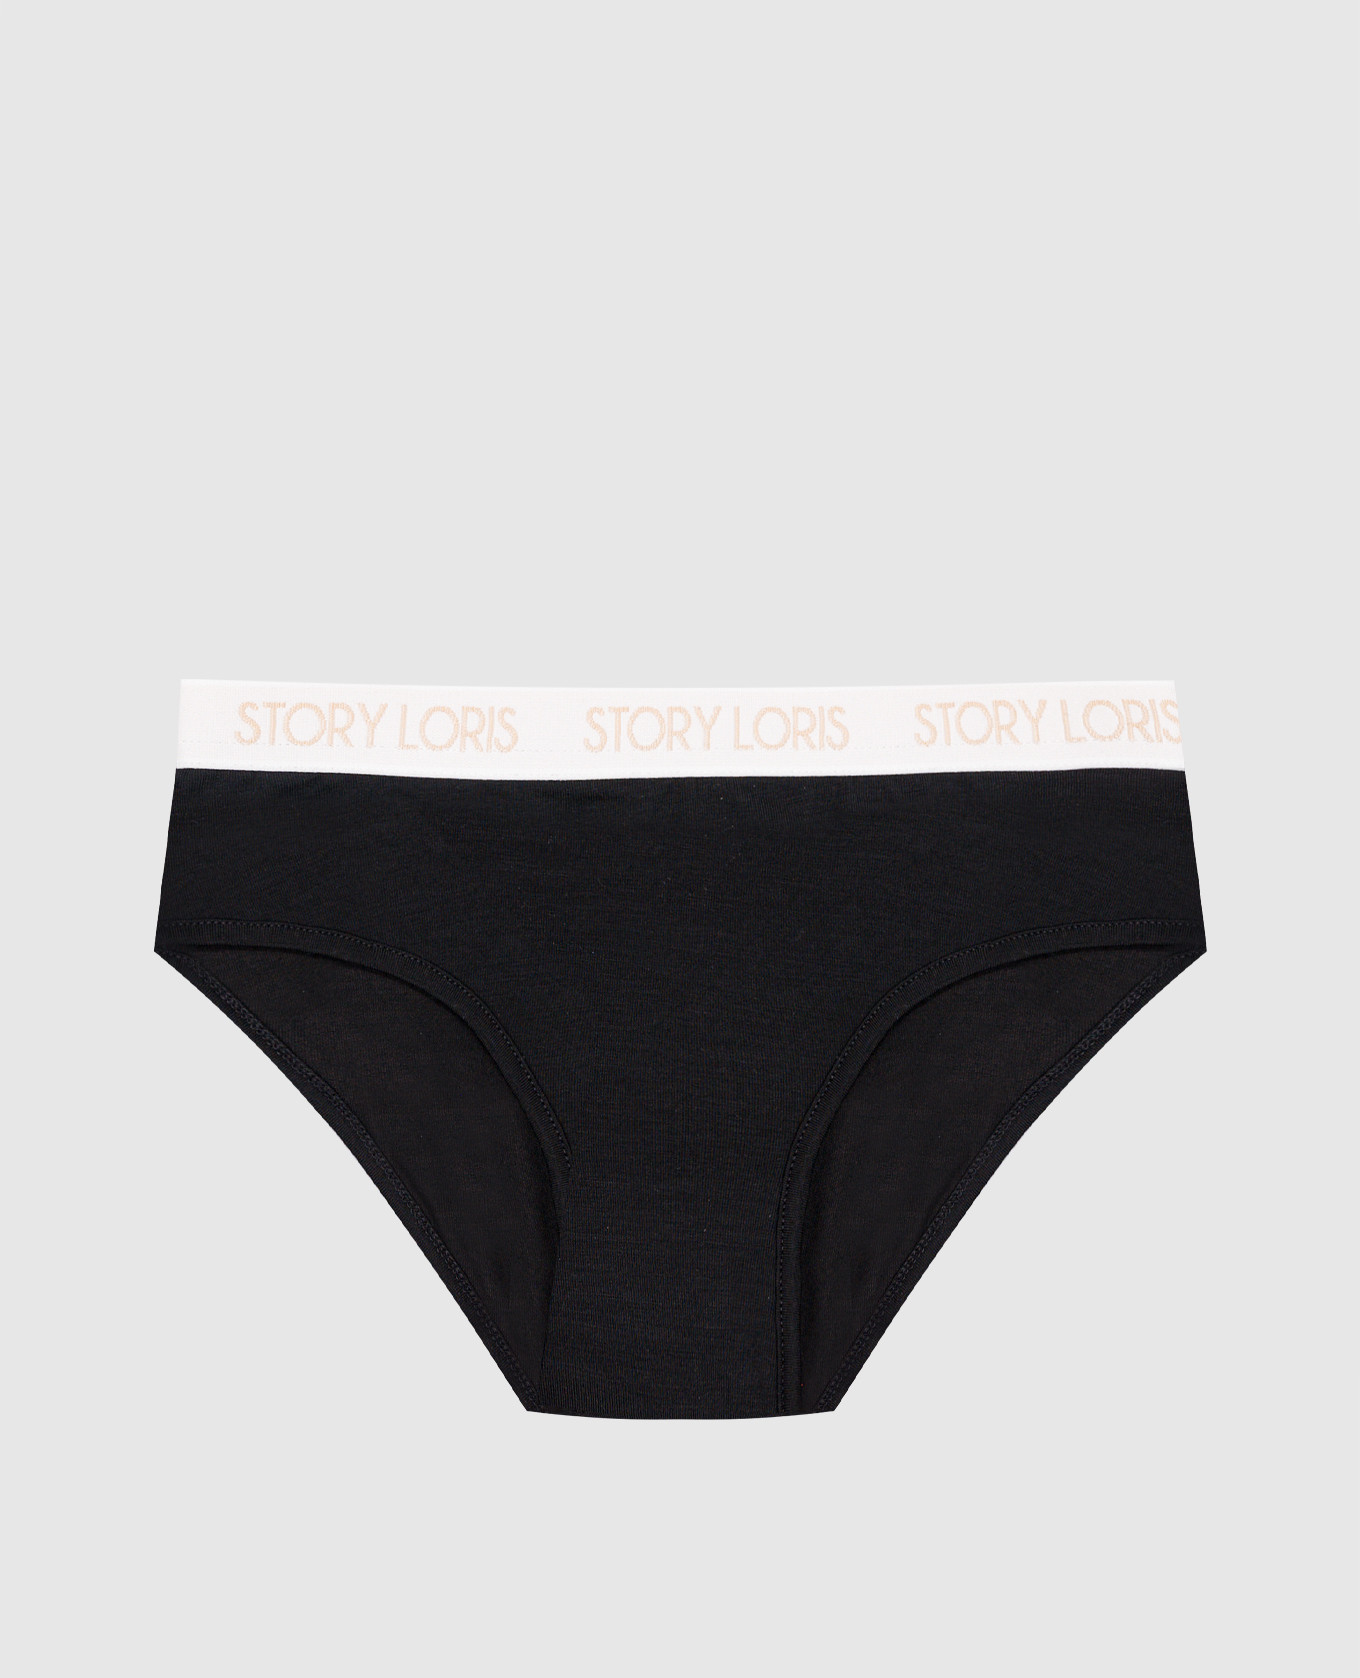 Children's black panties with a logo